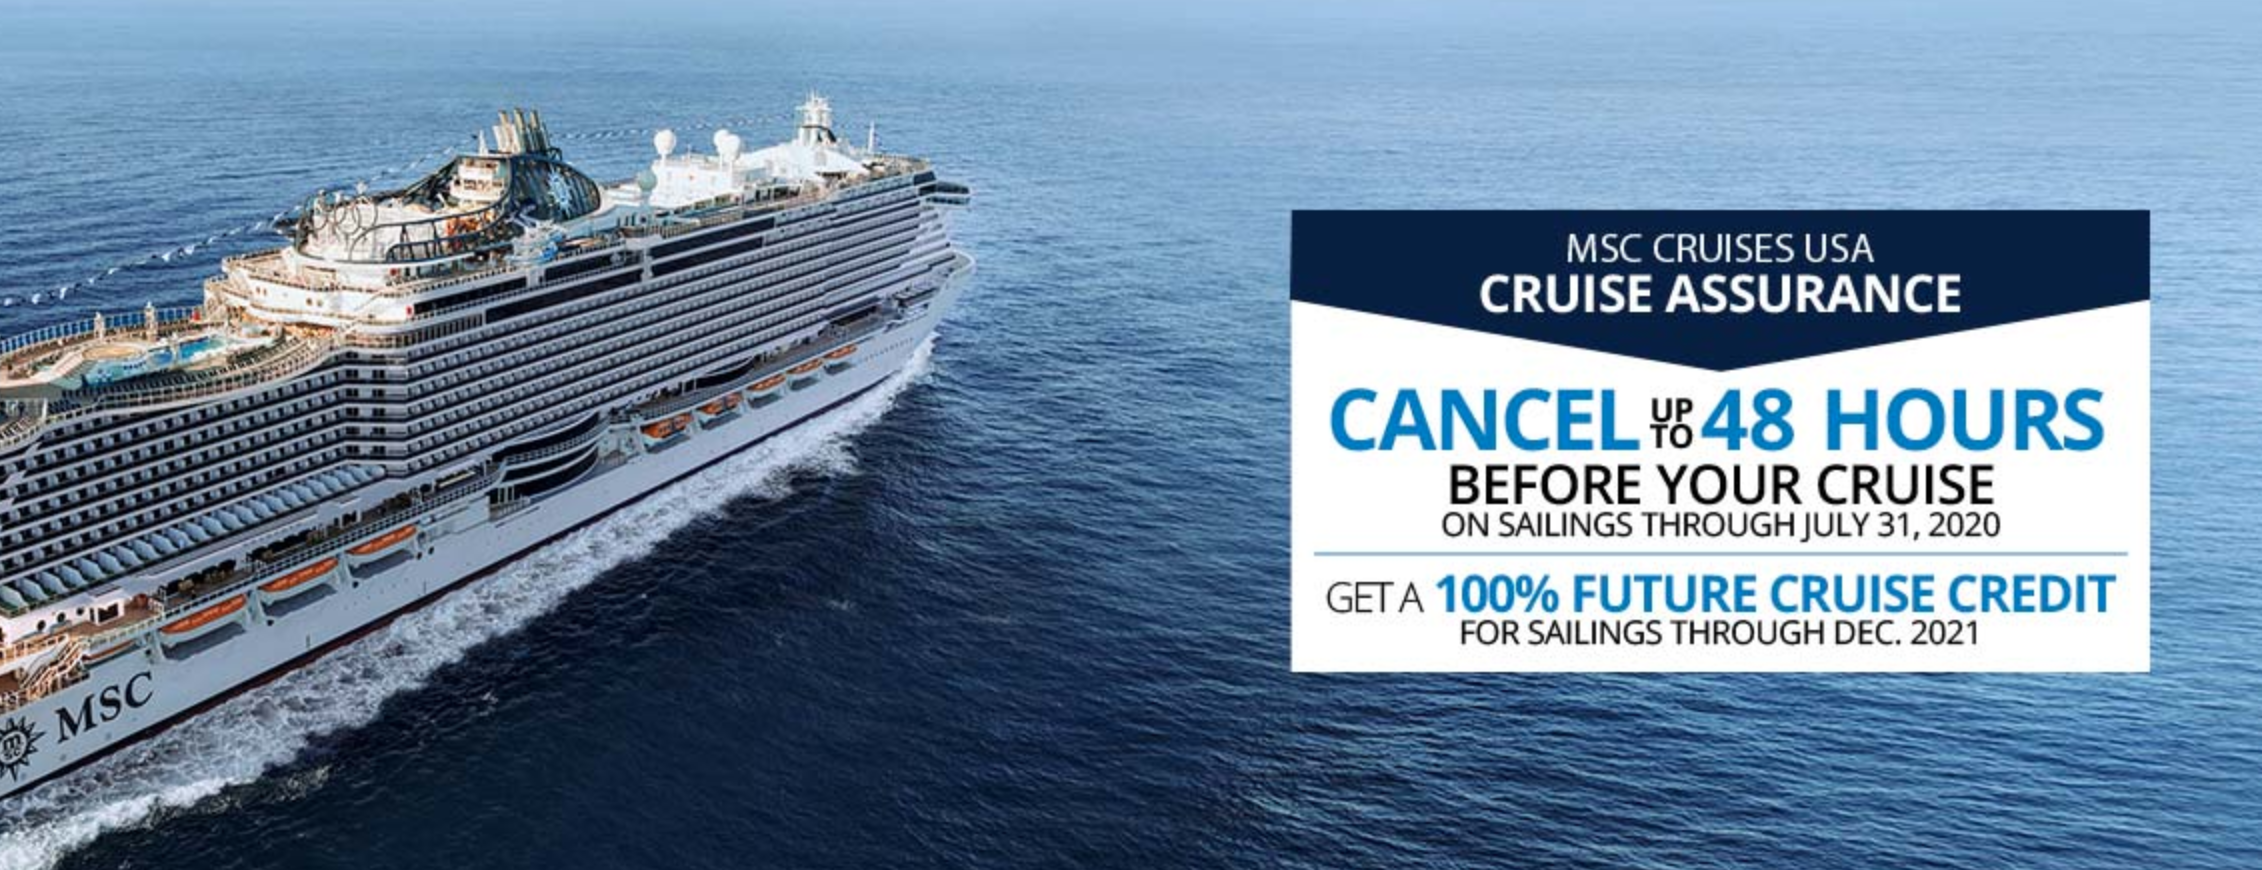 six star cruises cancellation policy